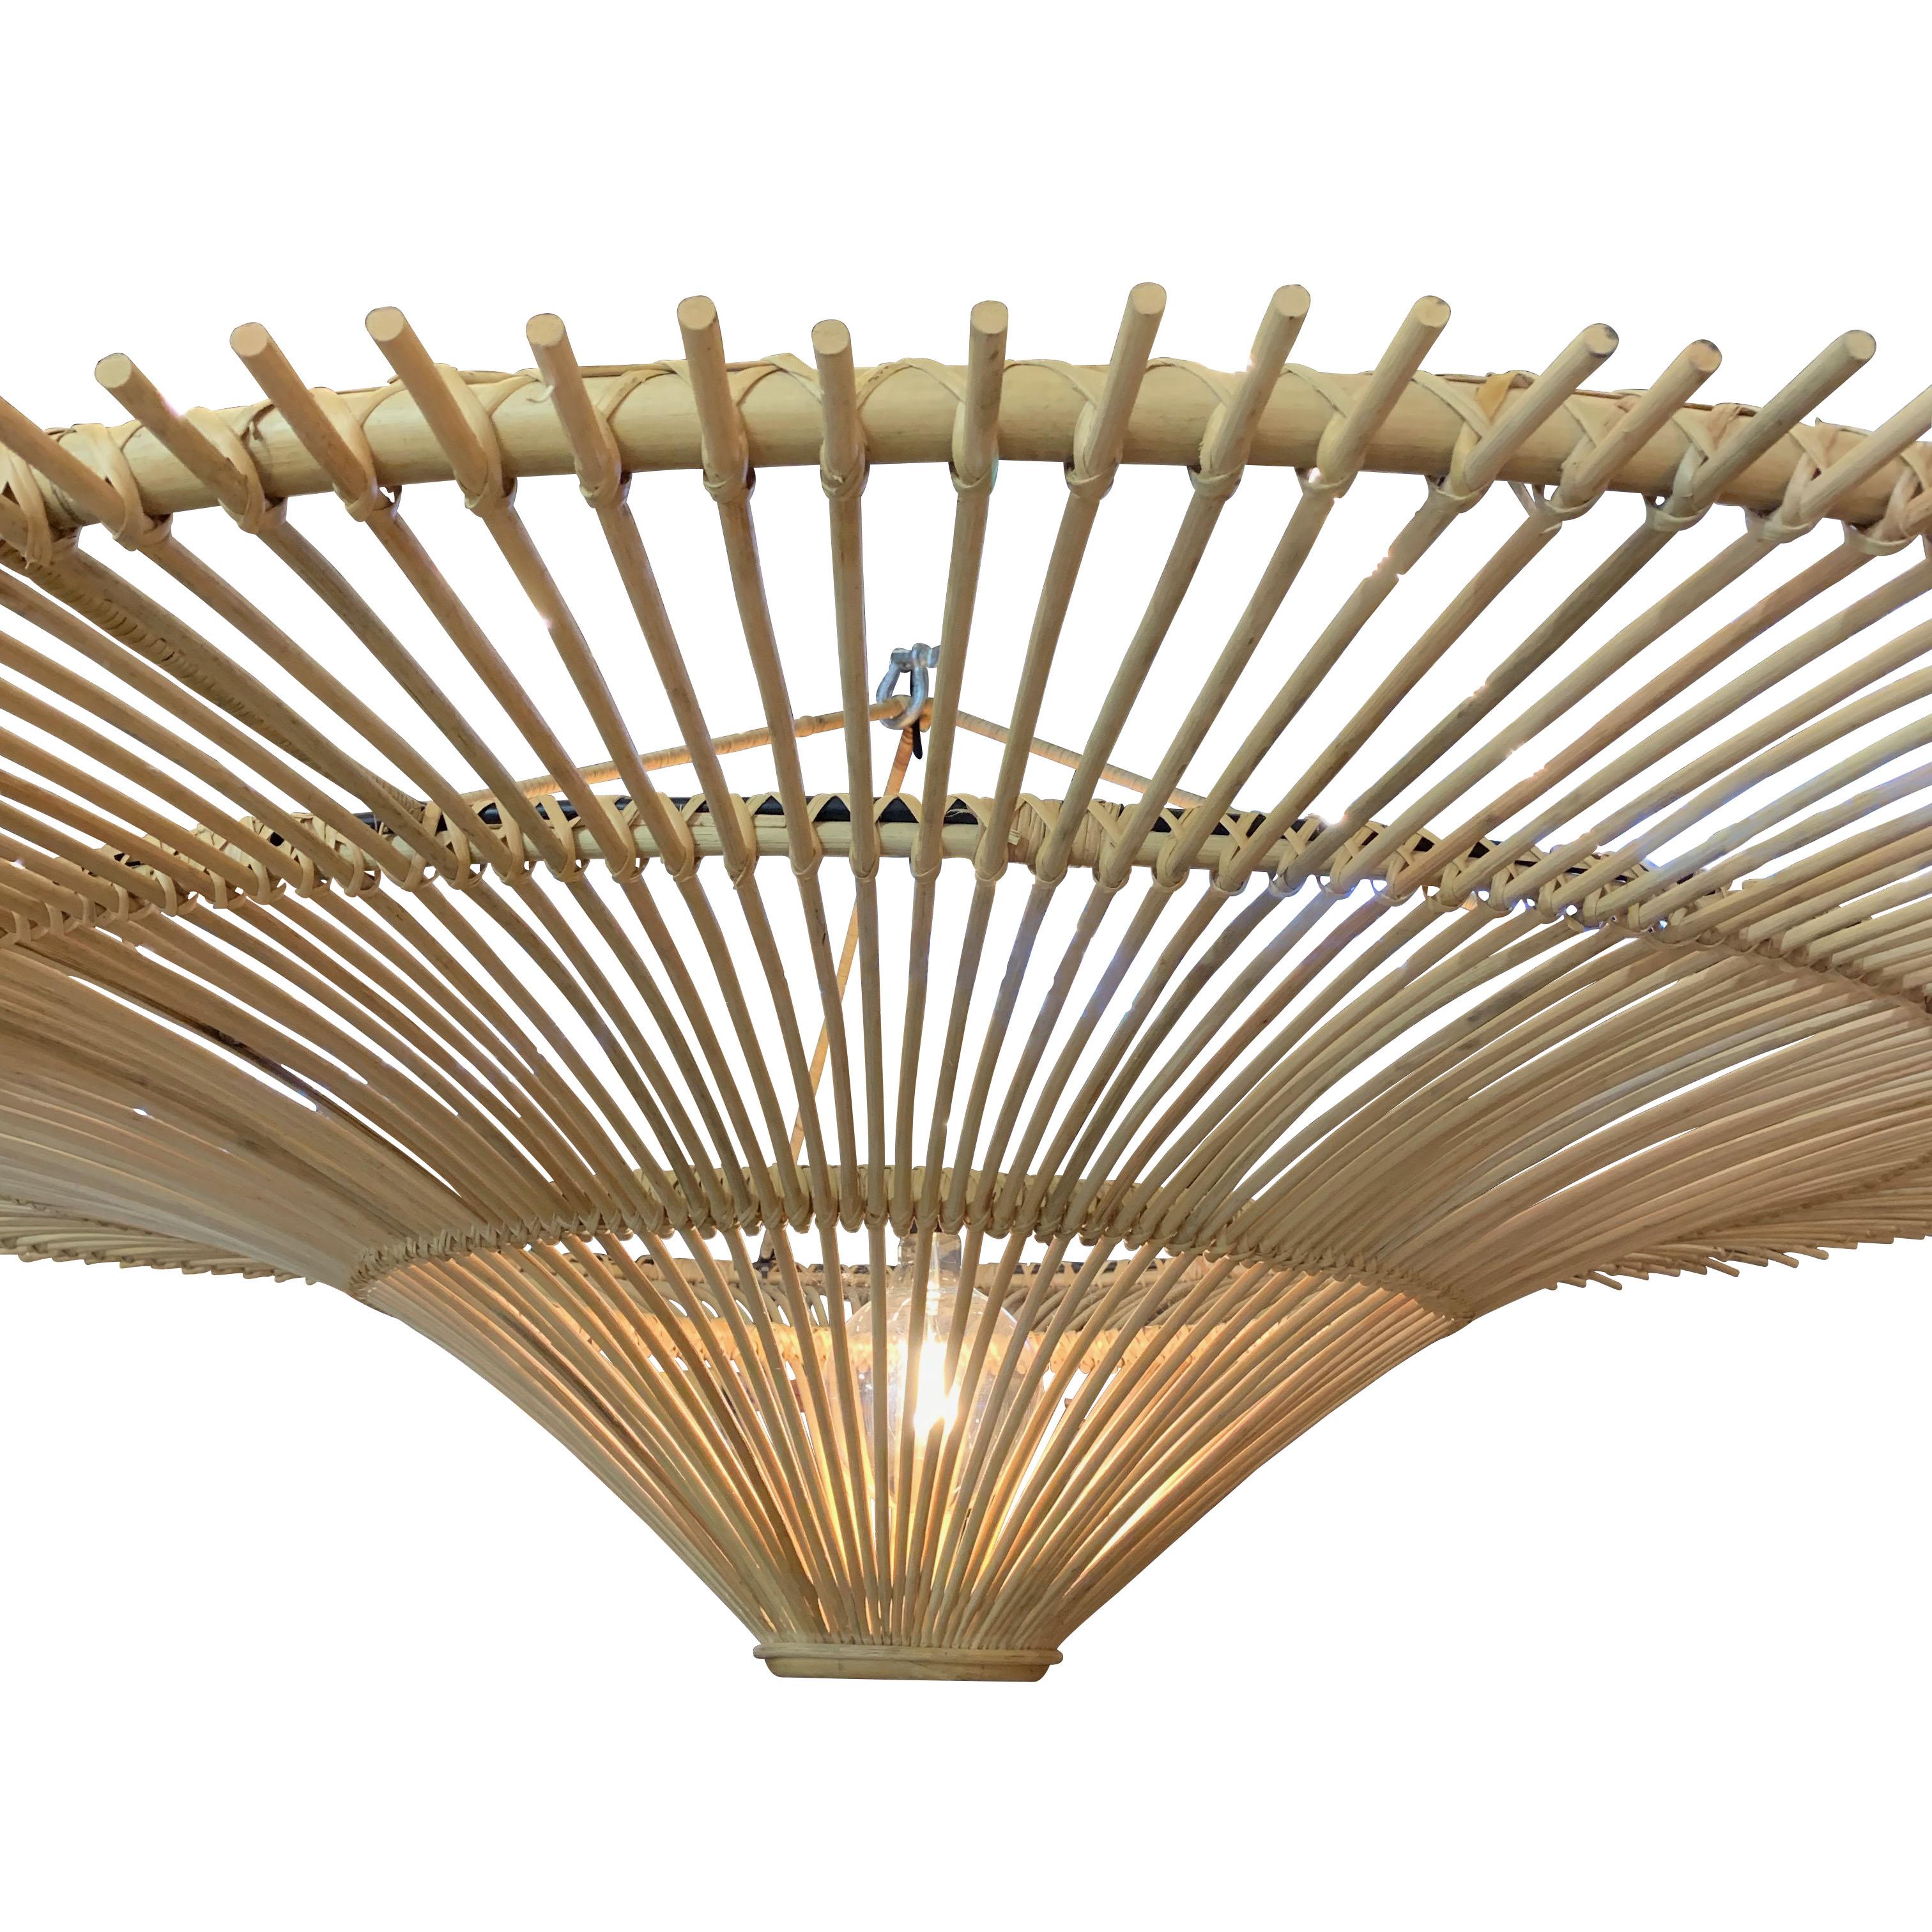 Contemporary Indonesian medium size round umbrella shaped chandelier made of bamboo.
Single bulb.
60watt to 100 watt maximum
ARRIVING AUGUST
Also available in large 71